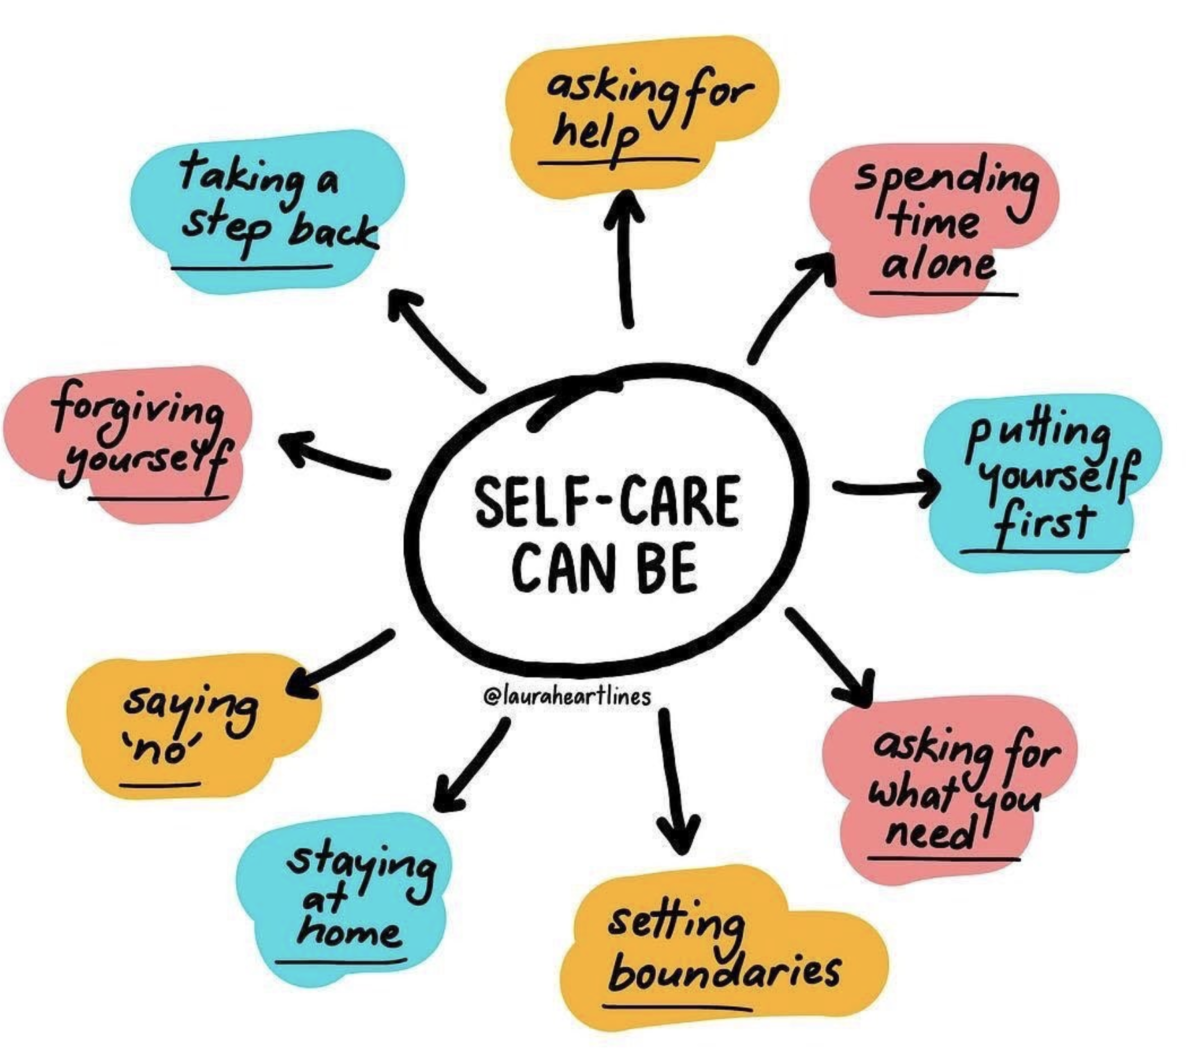 Infographic showing ideas about what self-care can be.